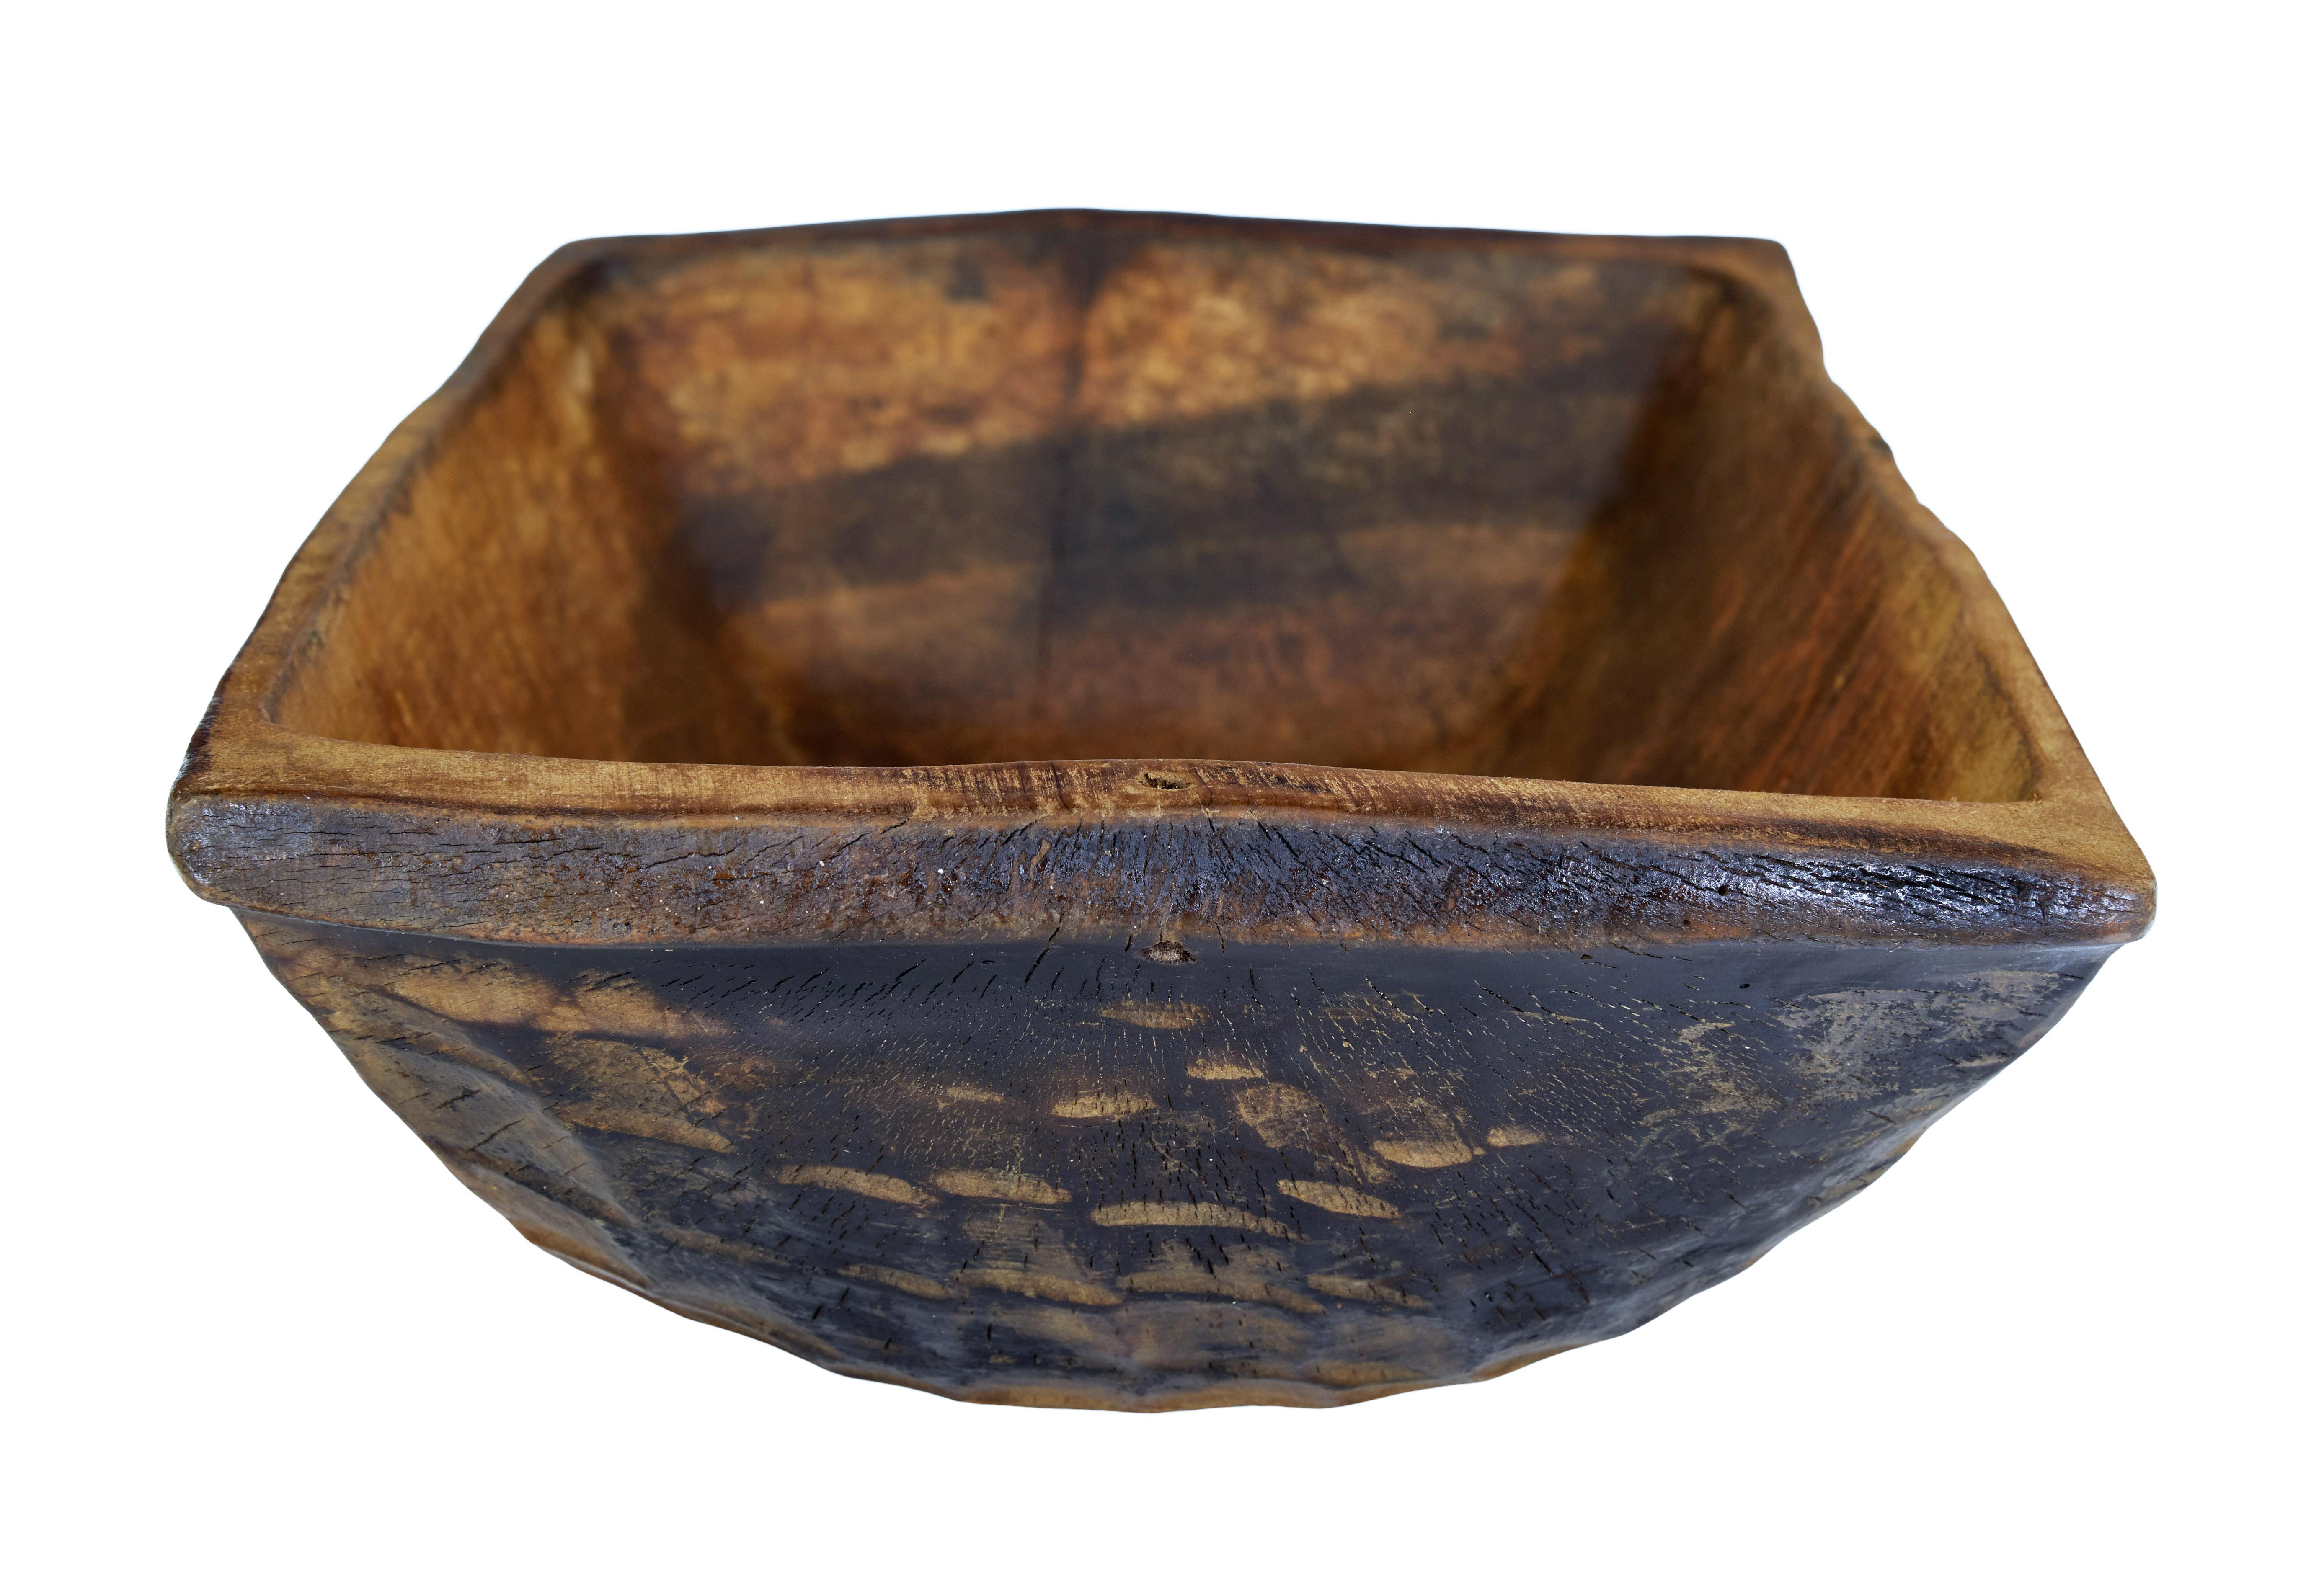 Early 20th century hand carved bowl circa 1900.

Functional piece of eastern european rustic woodenware.  Hand cut from a solid piece of wood and finished with an adzed technique.

Ideal for use as a table server or for retail display.  Charred to